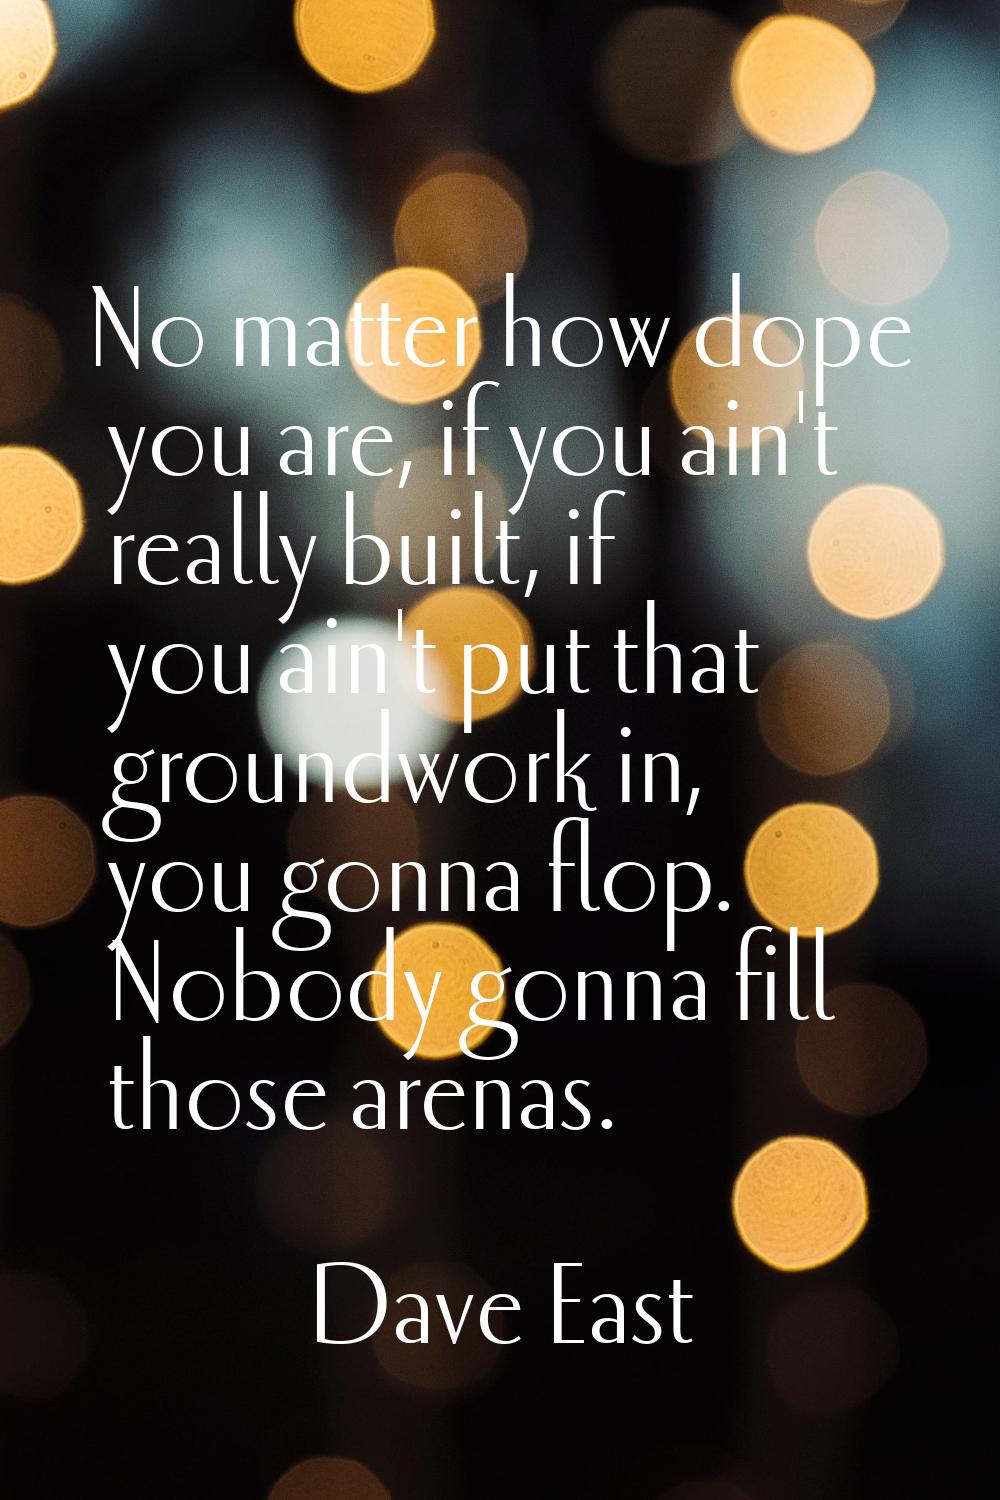 No matter how dope you are, if you ain't really built, if you ain't put that groundwork in, you gon